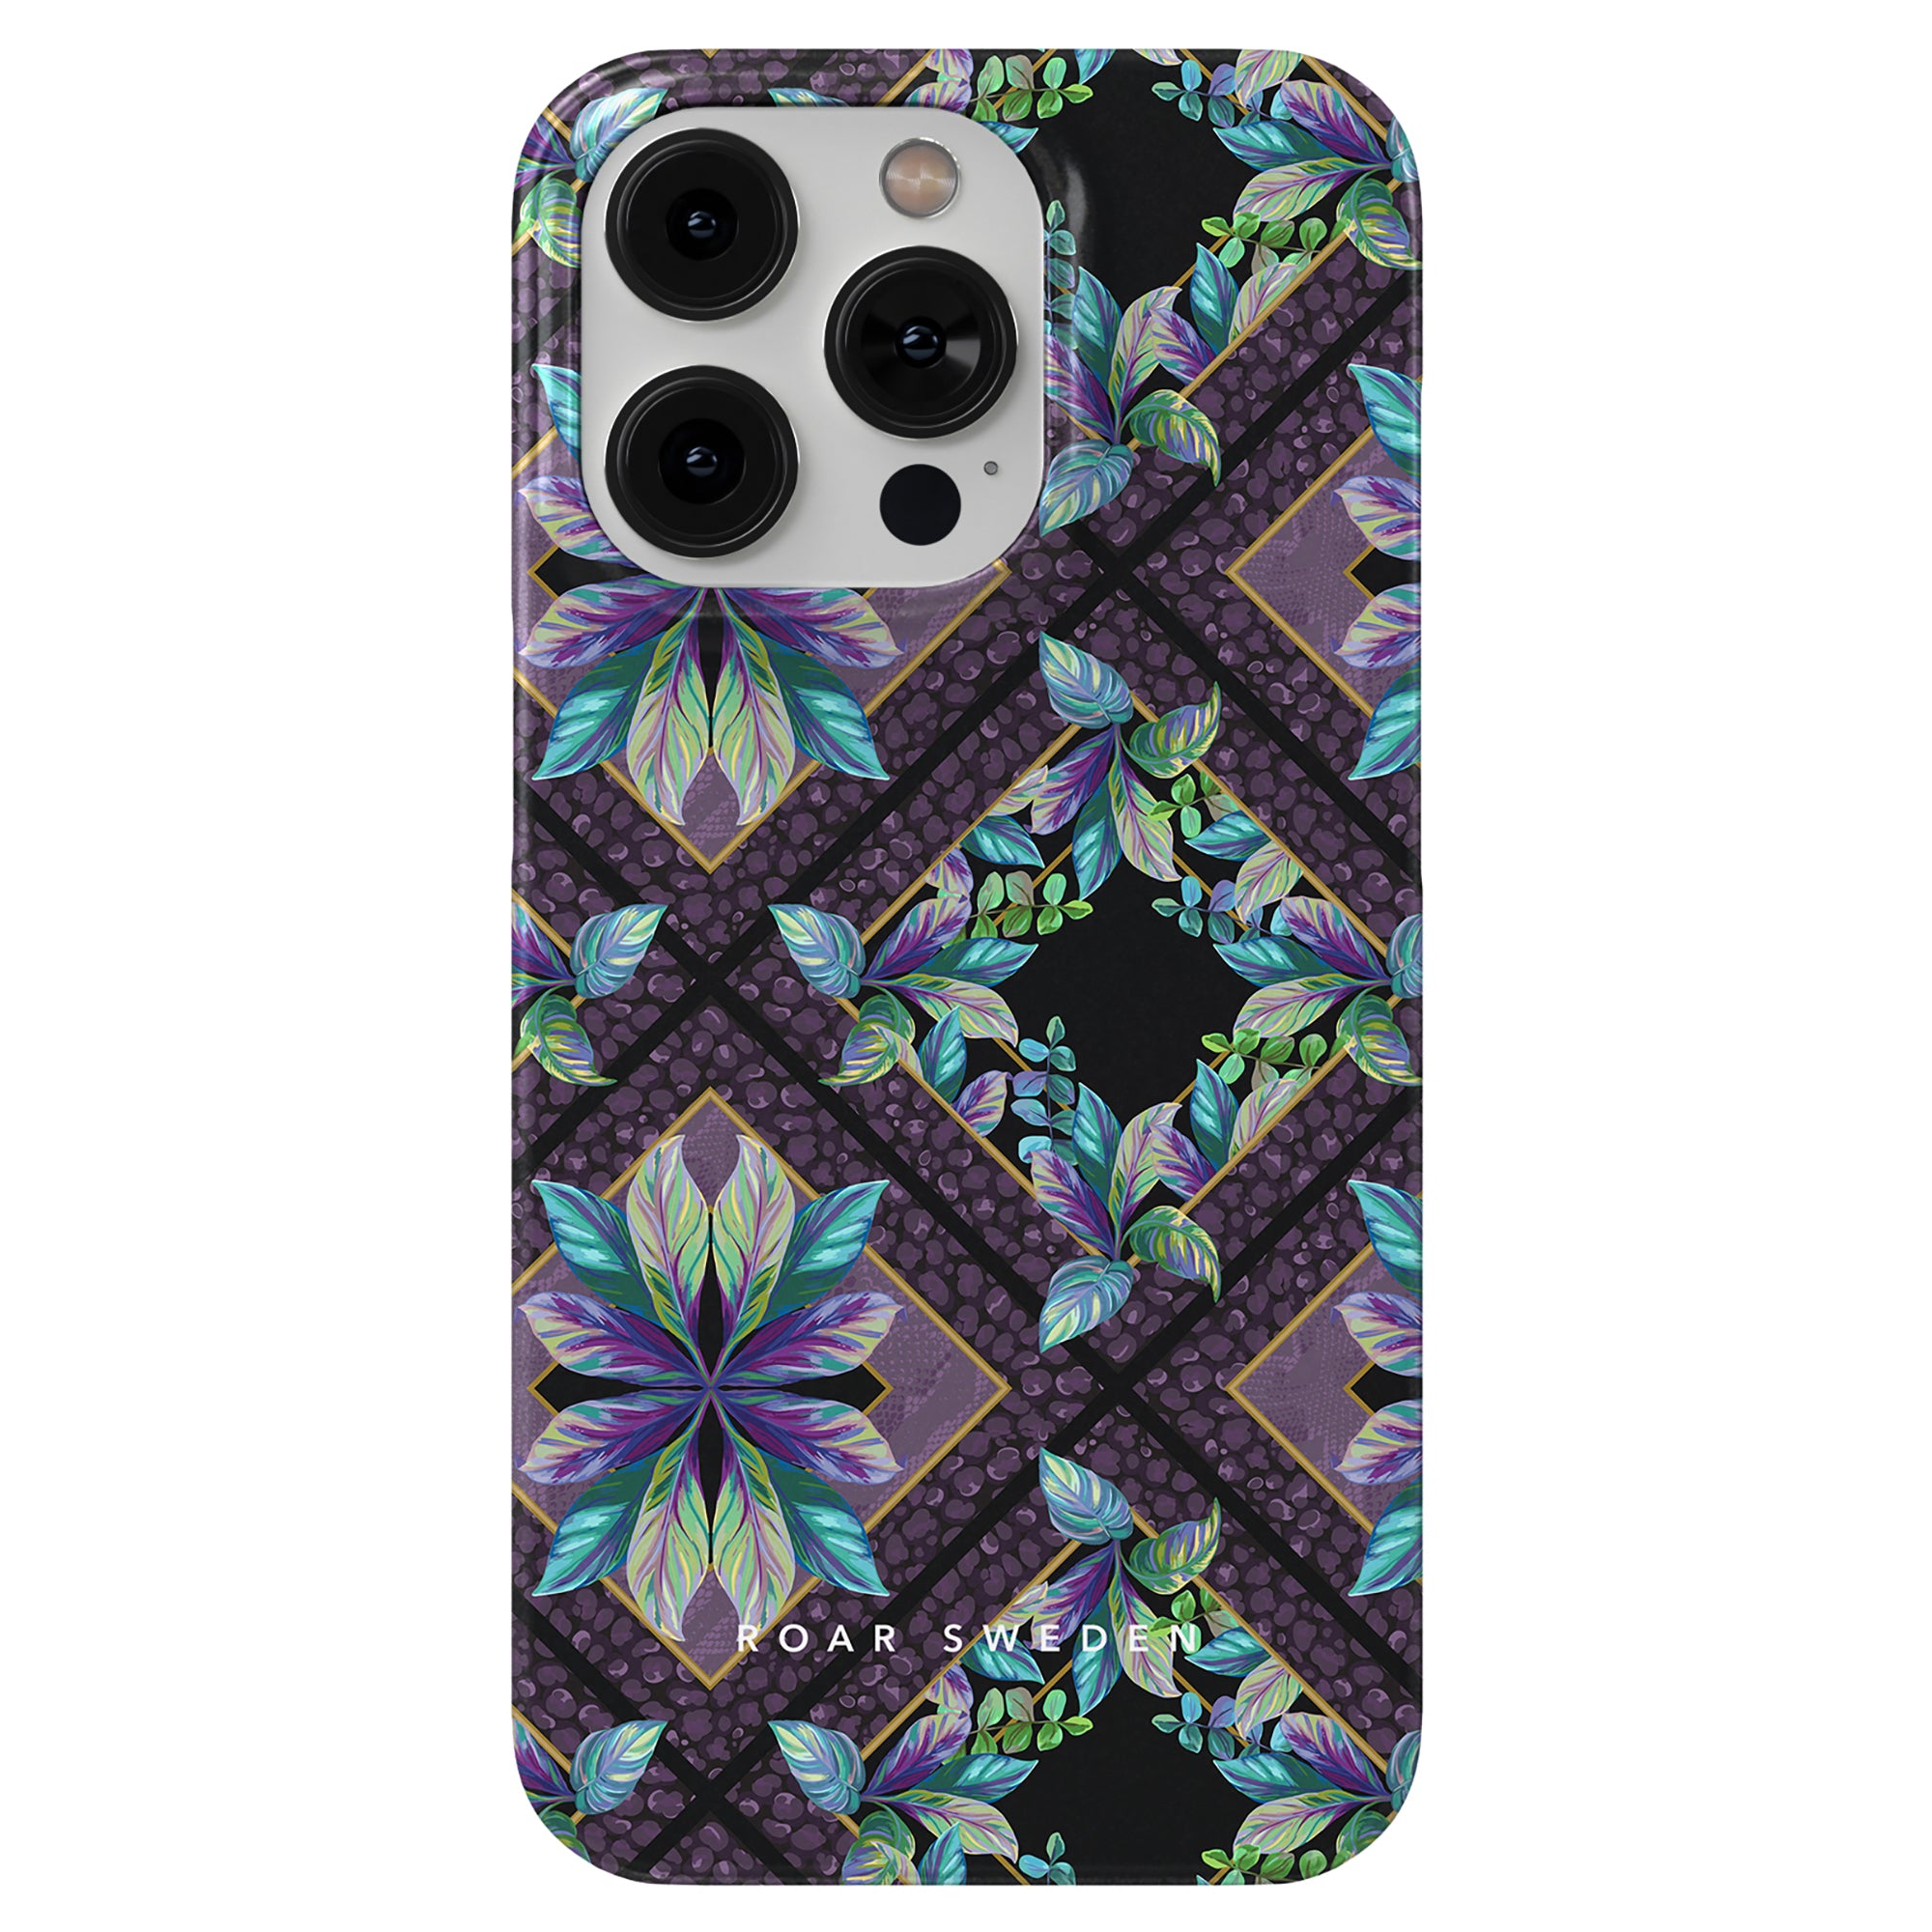 A Lush slim case phone case with a floral pattern in purple and blue.